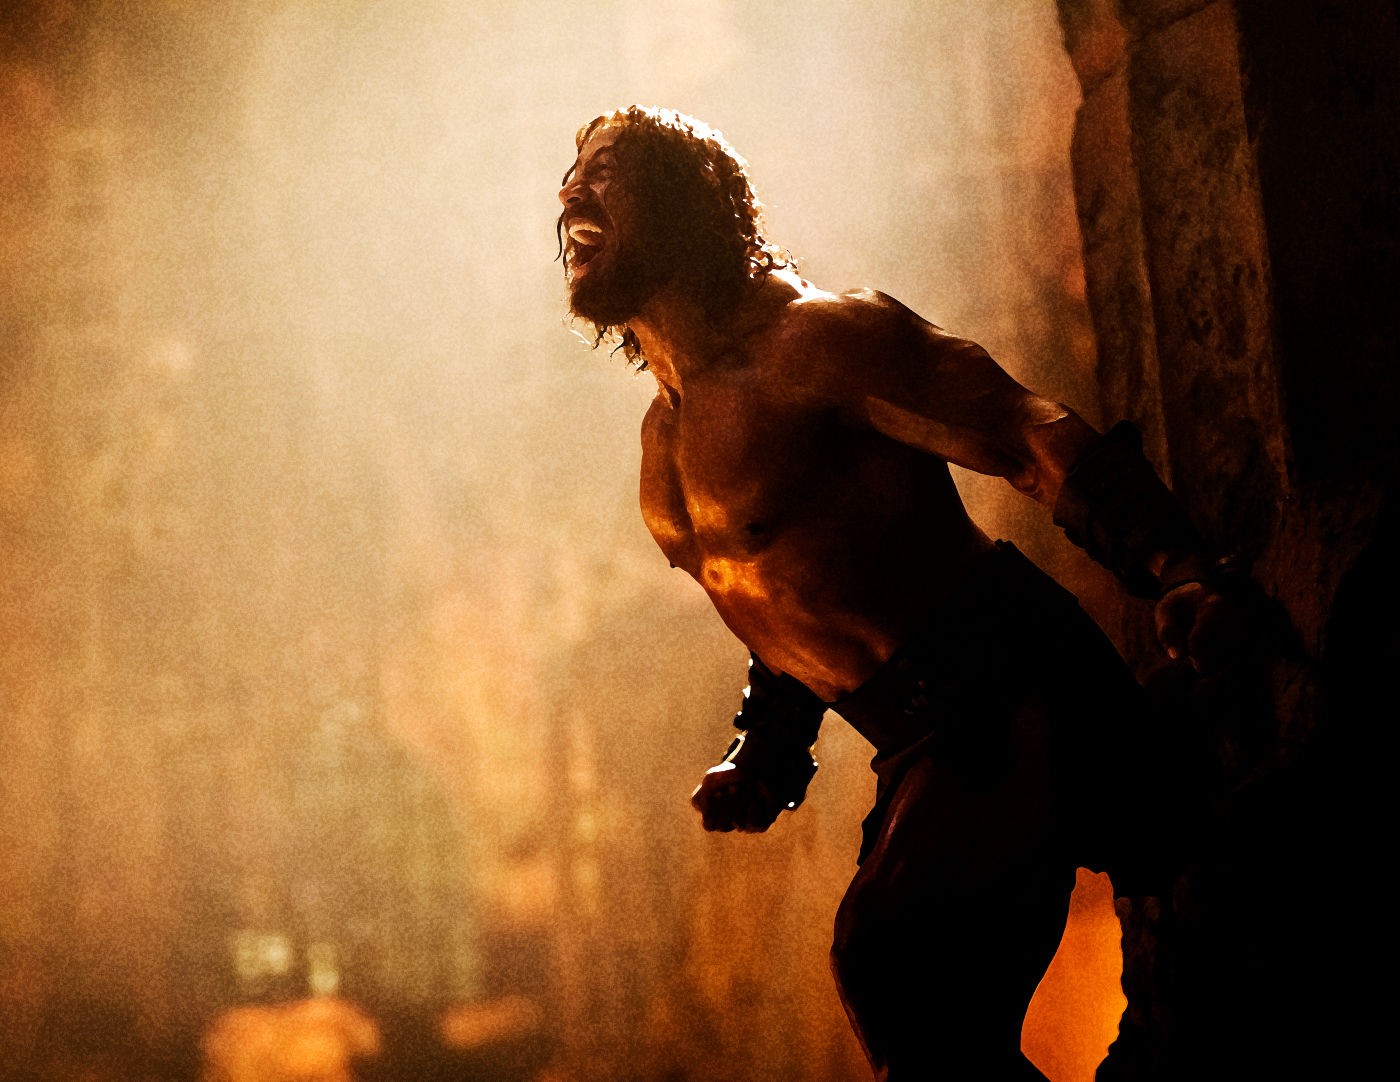 The Rock stars as Hercules in Paramount Pictures' Hercules (2014). Photo credit by David James.